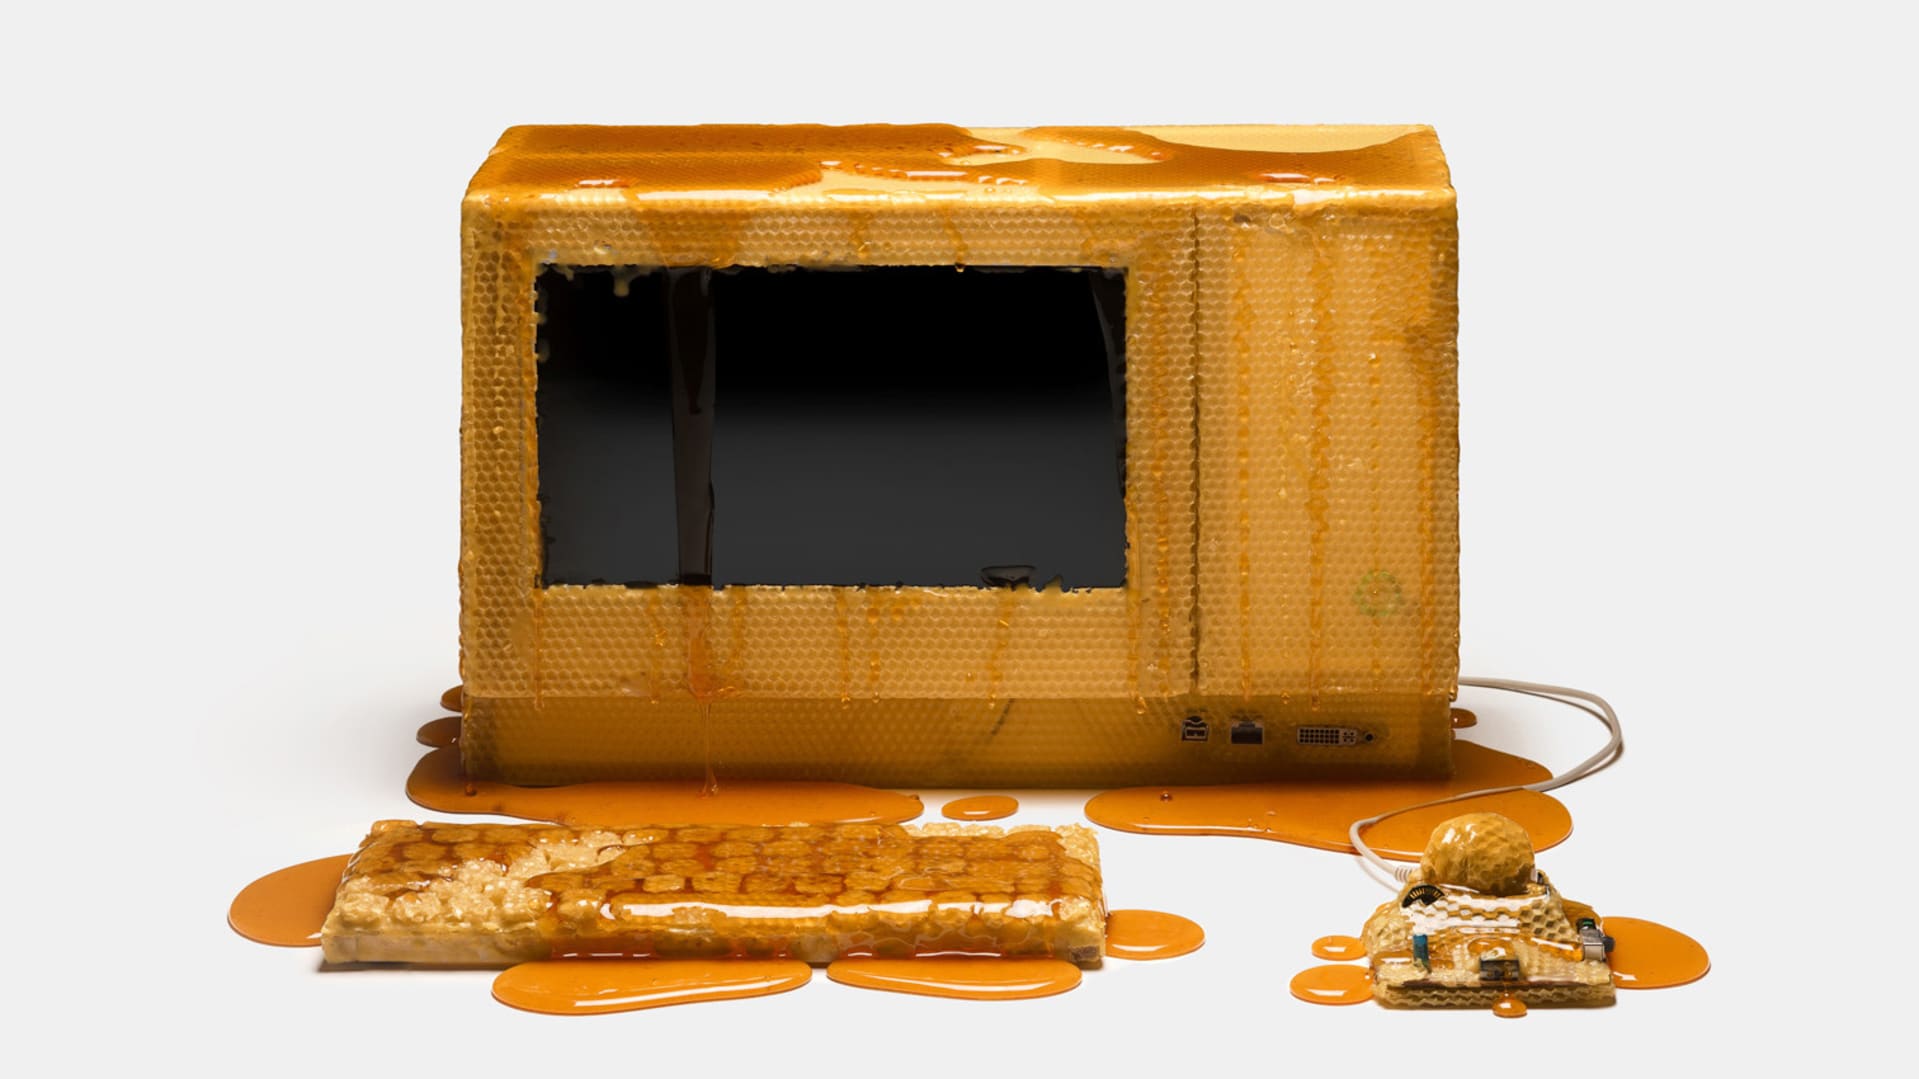 These jaw-dropping Macs are made of ice, honey, and dirt